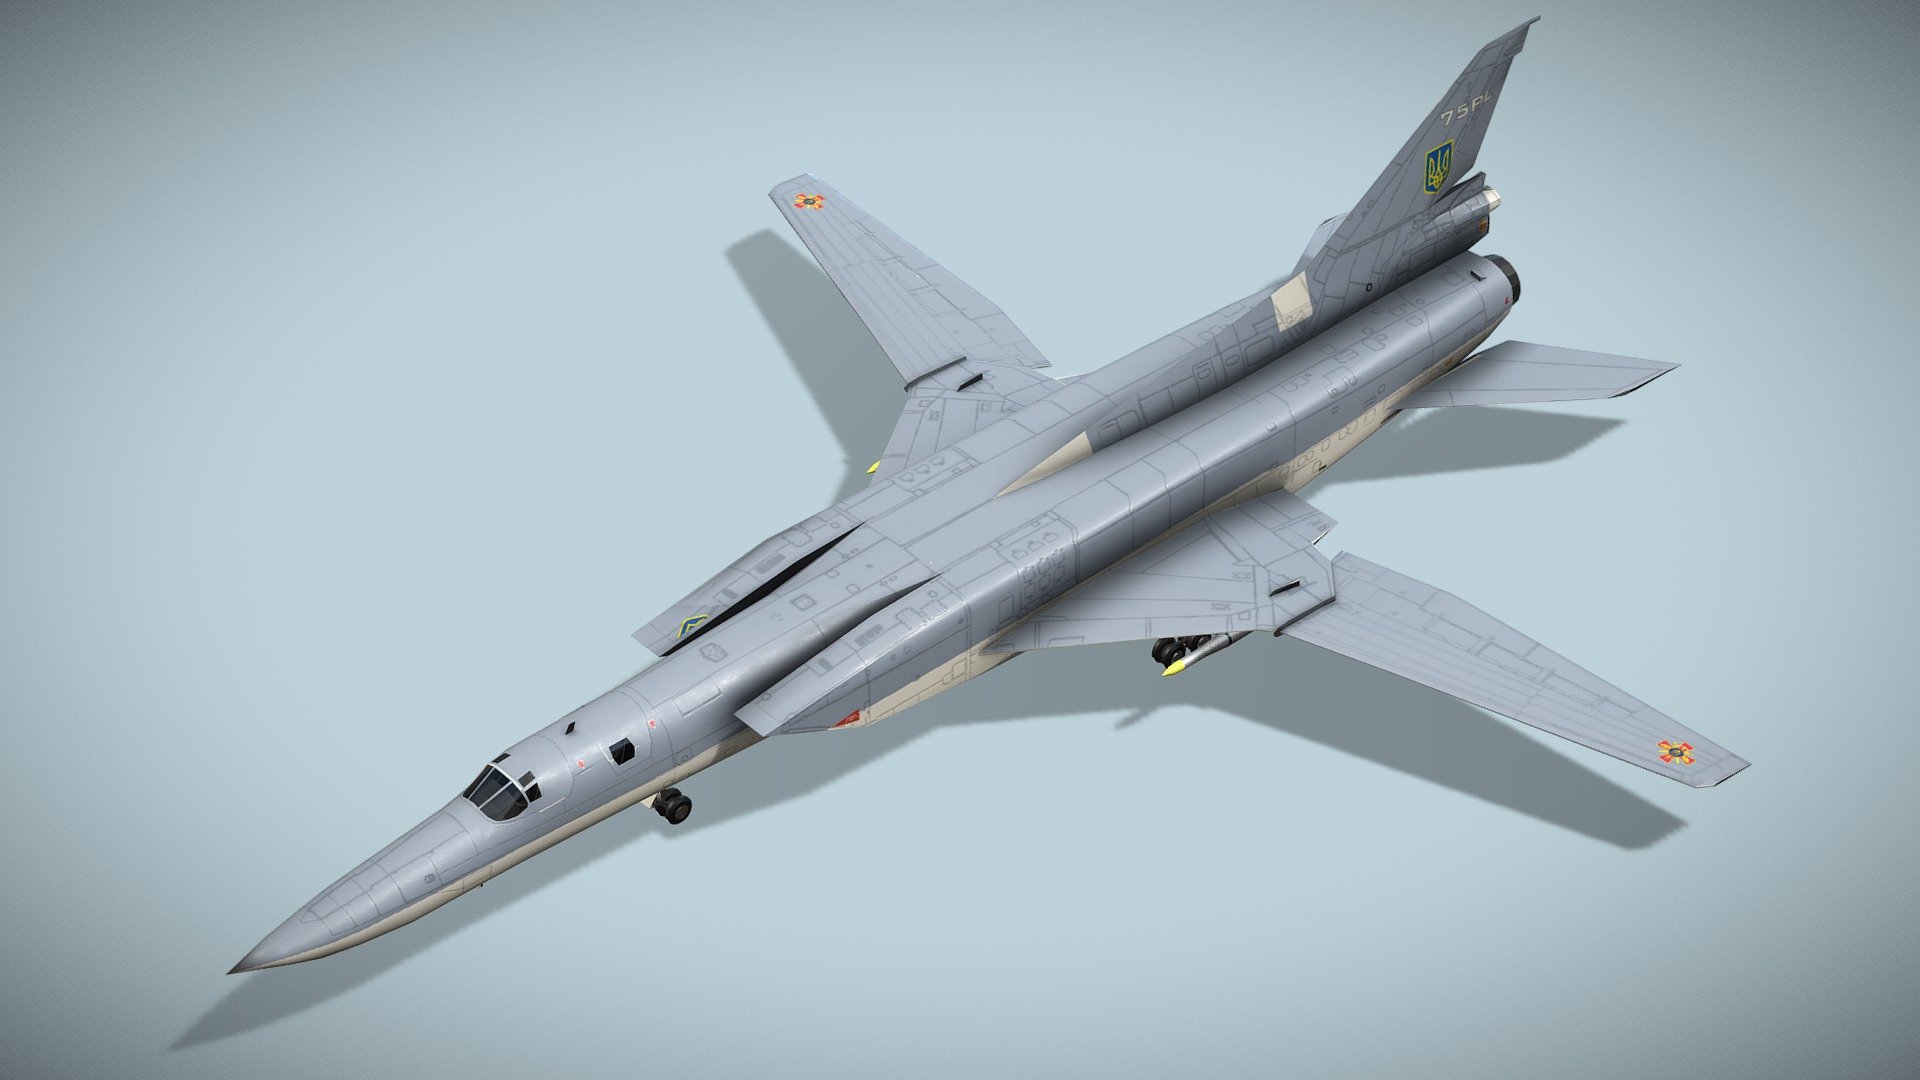 Tupolev Tu-22M3 Backfire

Lowpoly model of russian supersonic strategic bomber



The Tupolev Tu-22M3 Backfire is a supersonic, variable-sweep wing, long-range strategic and maritime strike bomber developed by the Tupolev Design Bureau in the 1960s. The bomber was reported as being designated Tu-26 by western intelligence at one time. During the Cold War, the Tu-22M was operated by the Soviet Air Forces (VVS) in a missile carrier strategic bombing role, and by the Soviet Naval Aviation (Aviatsiya Voyenno-Morskogo Flota, AVMF) in a long-range maritime anti-shipping role. As of 2021, there were 66 of the aircraft in service.



Fully rigged

Model has bump, metal, roughness maps and 2 x diffuse textures.



Check also my other aircrafts and cars.

Patreon with monthly free model - Tupolev Tu-22M3 Backfire - Buy Royalty Free 3D model by NETRUNNER_pl 3d model